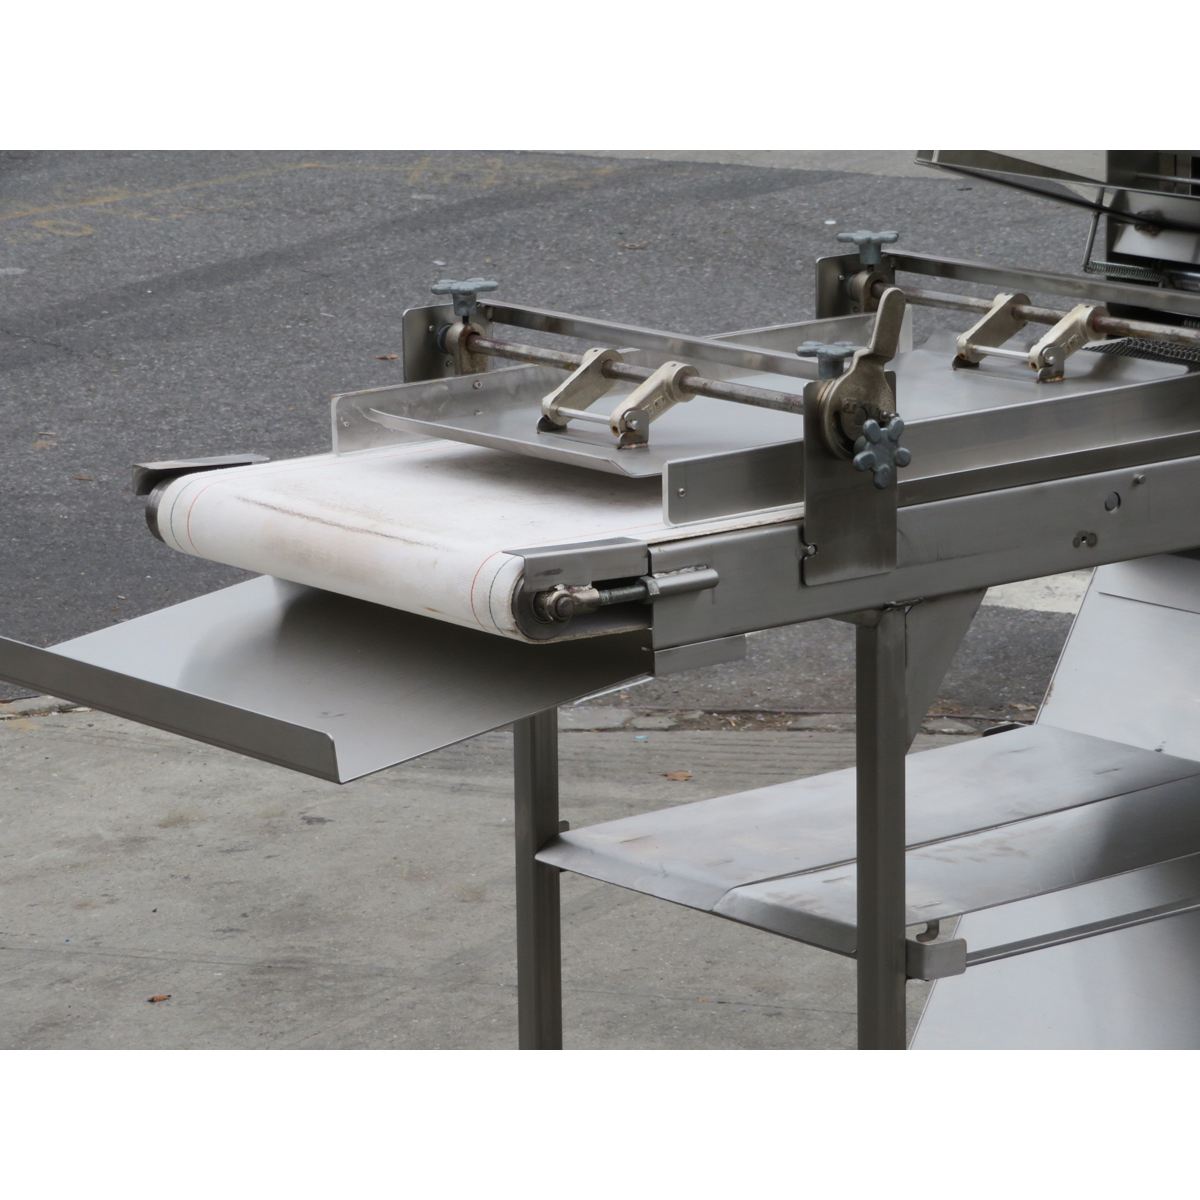 Acme 88-4 Dough Sheeter / Moulder, Used Great Condition image 2